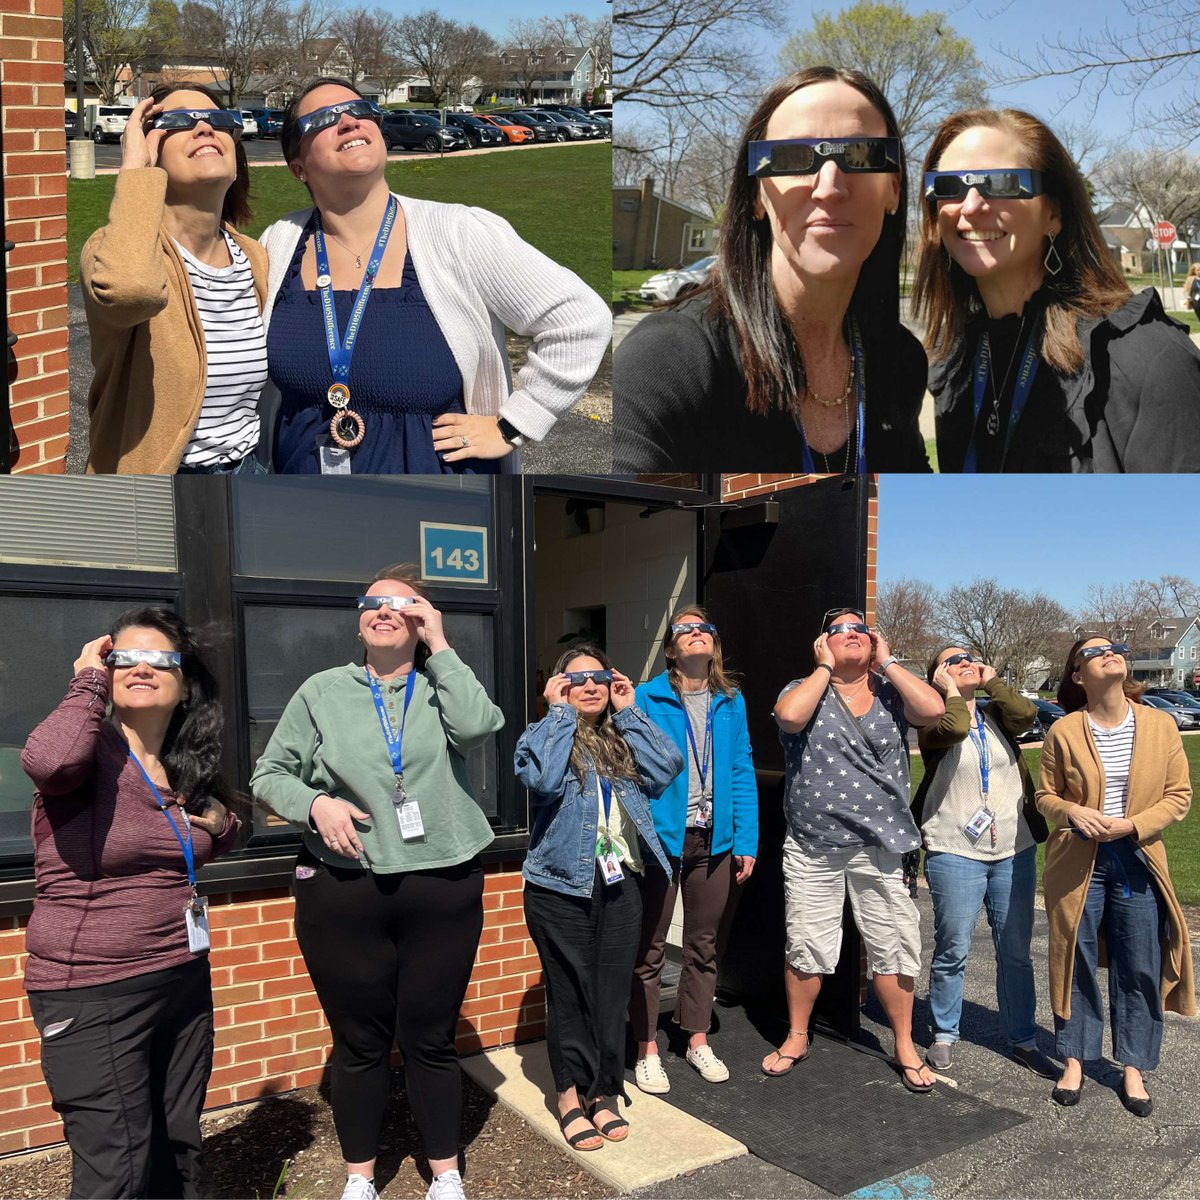 It was the perfect day for an Eclipse! Today was definitely one for the memory books! ☀️🌕🕶️ #d105difference